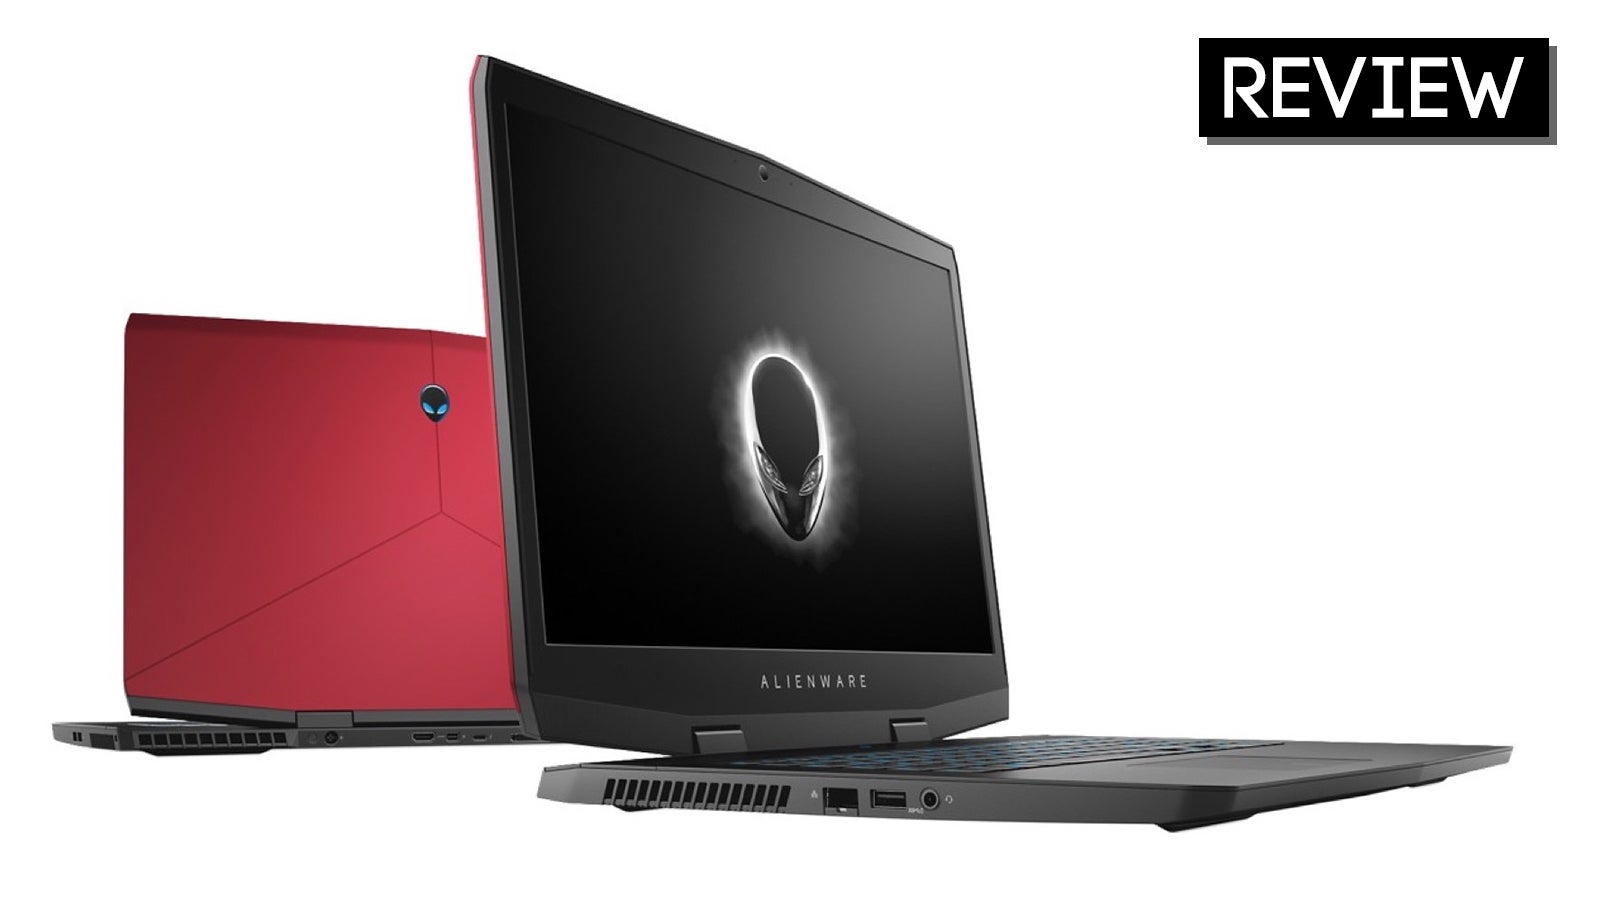 The Alienware m17 Laptop Is Great For 4K Gaming